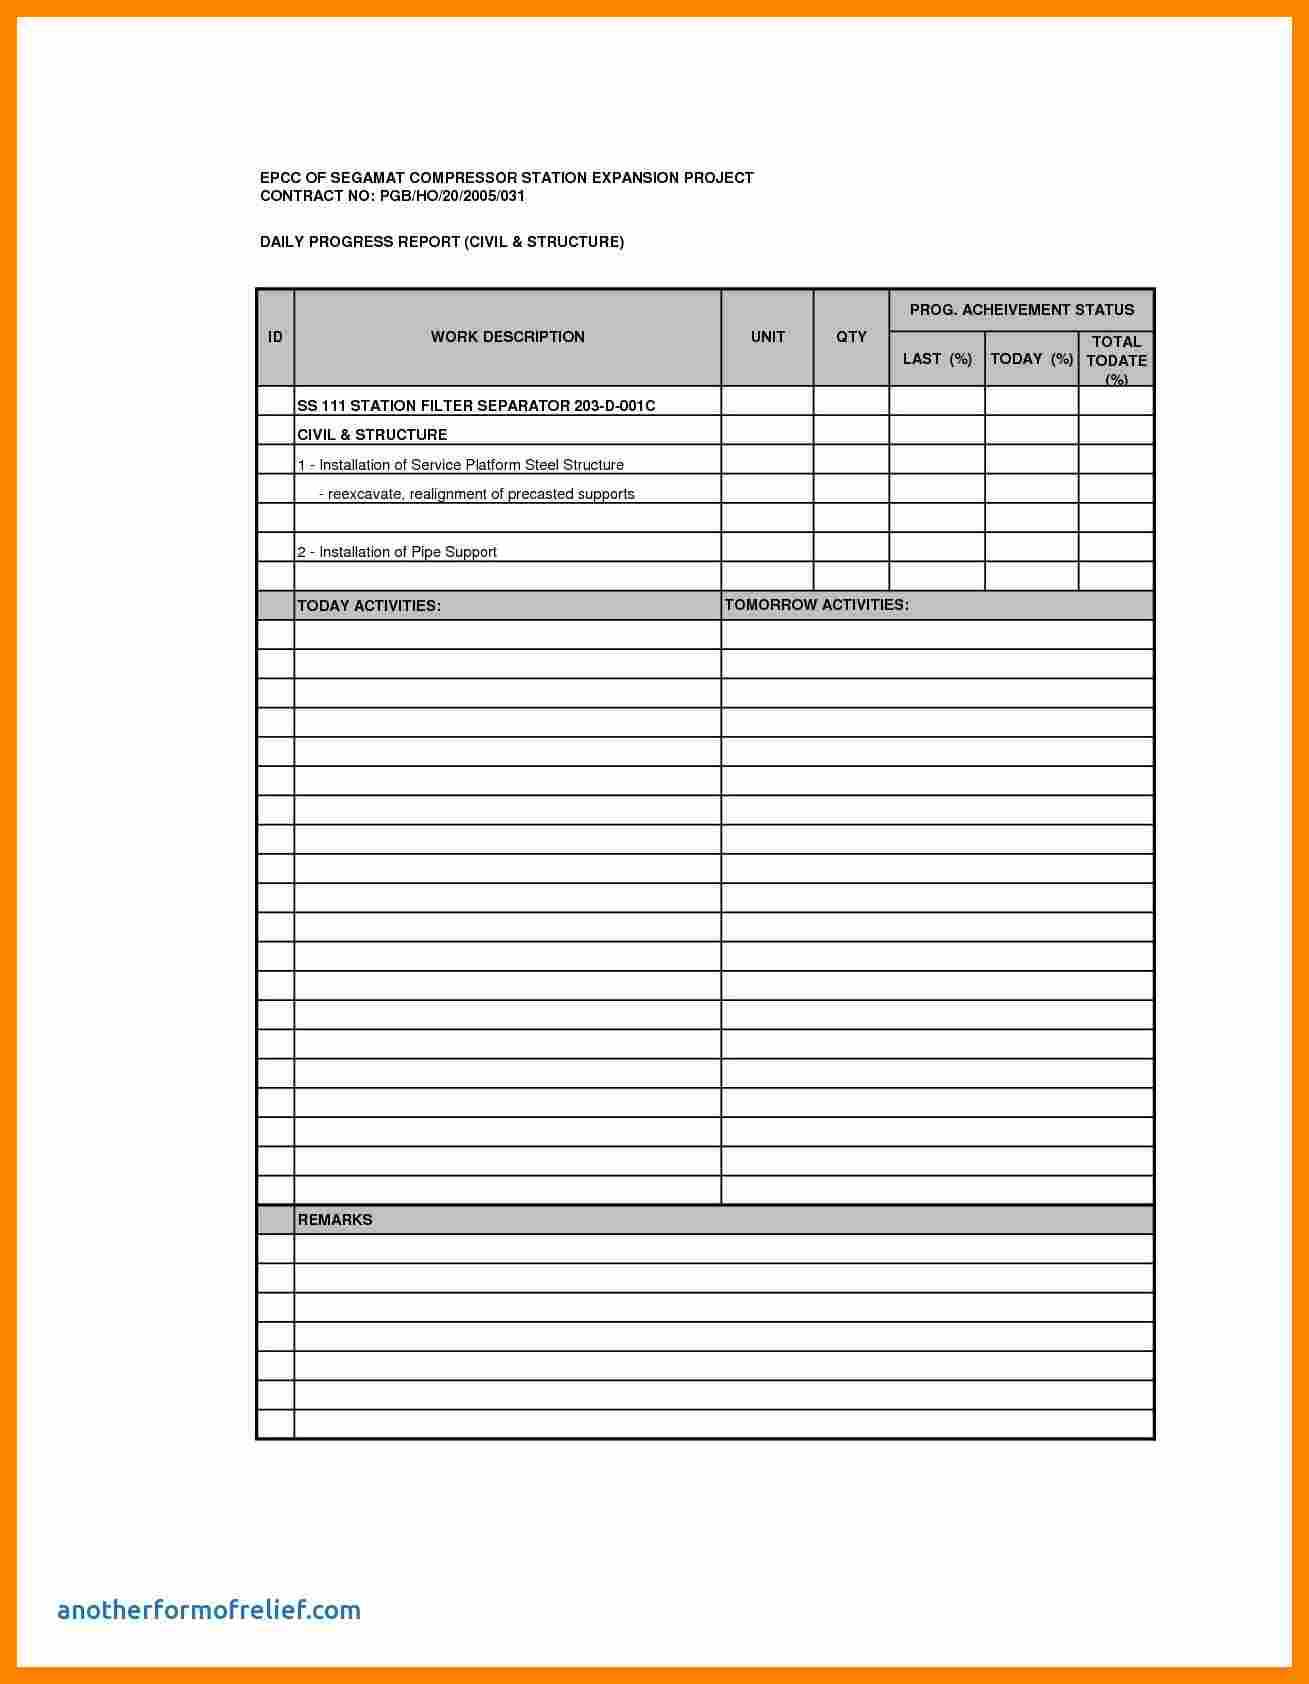 010 Daily Progress Report Format For Construction In Excel Inside Construction Daily Progress Report Template